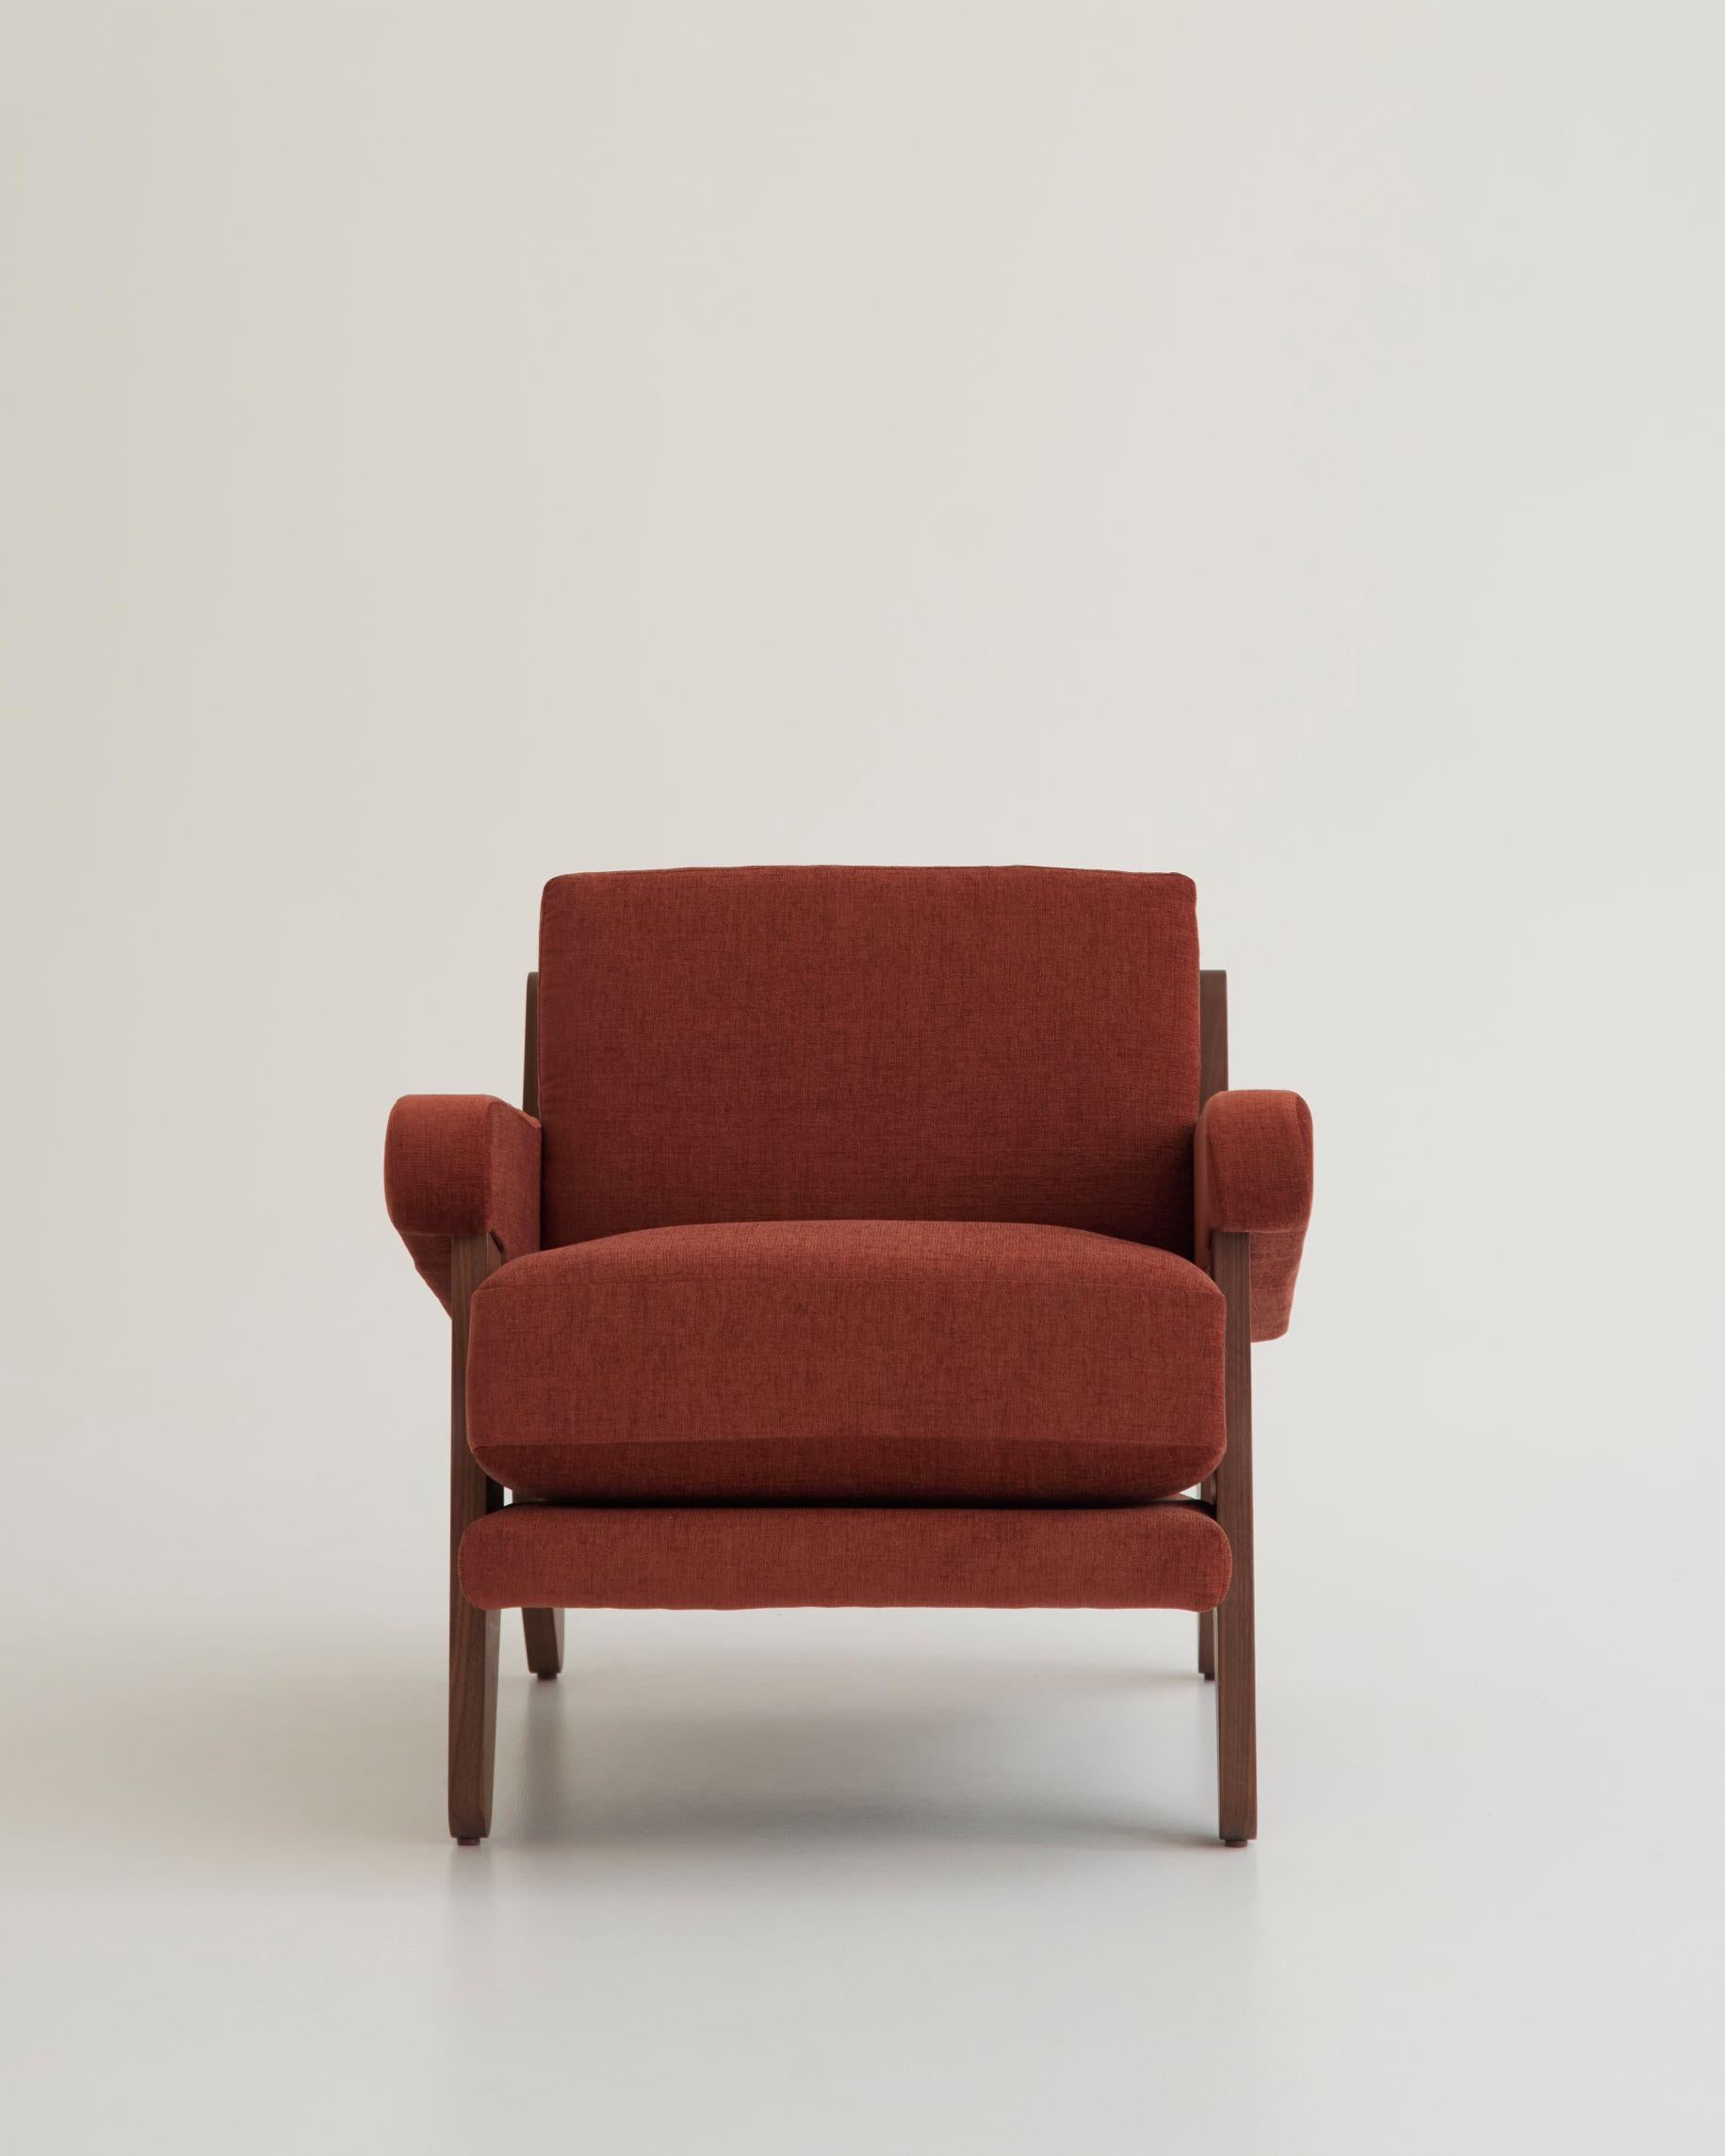 The Booham single sofa by Daniel Boddam Studio, is a design that marries modernist influences with Boddam’s signature Australian sensibility.

A testament to simplicity and elegance, the growing Booham Collection is inspired by a lifetime of